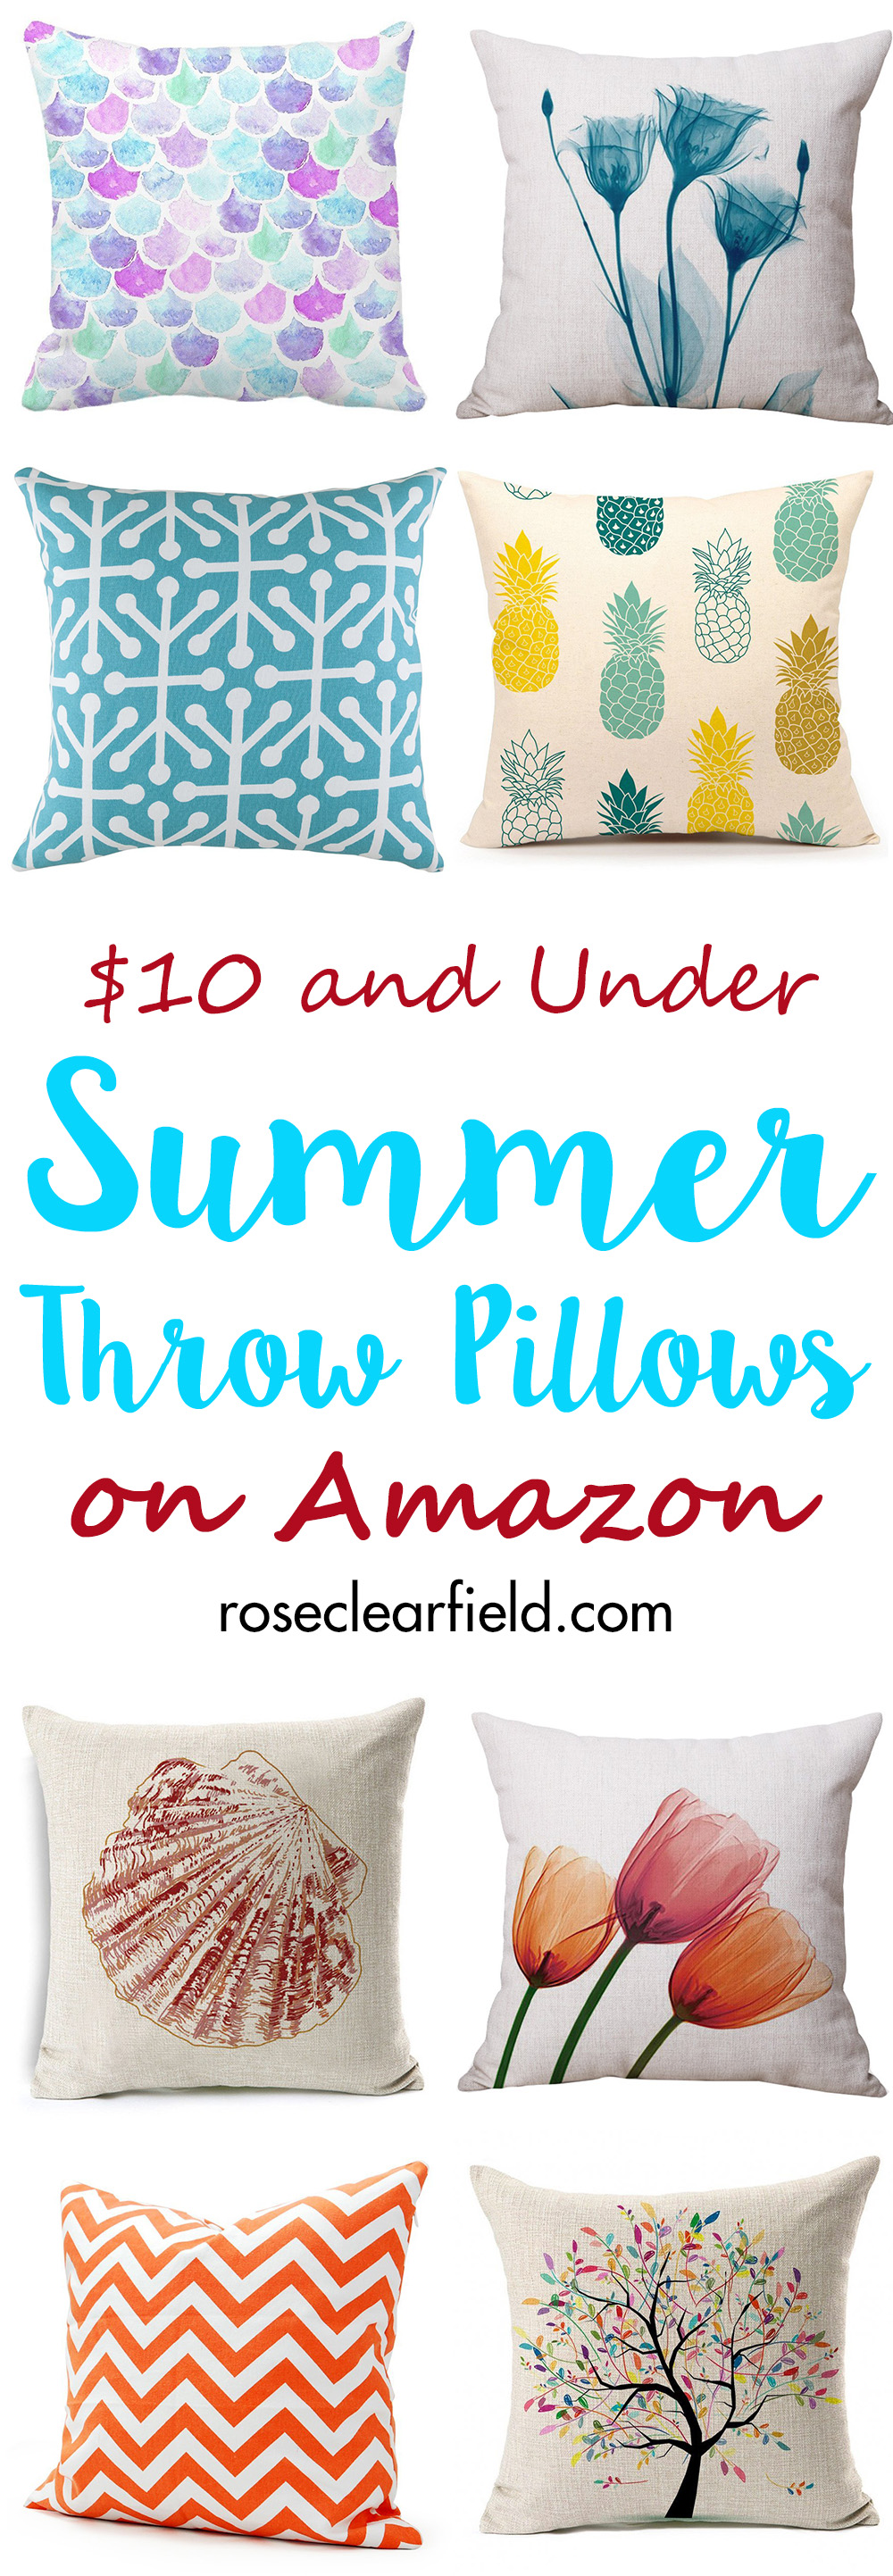 $10 and Under Summer Throw Pillows on Amazon | https://www.roseclearfield.com